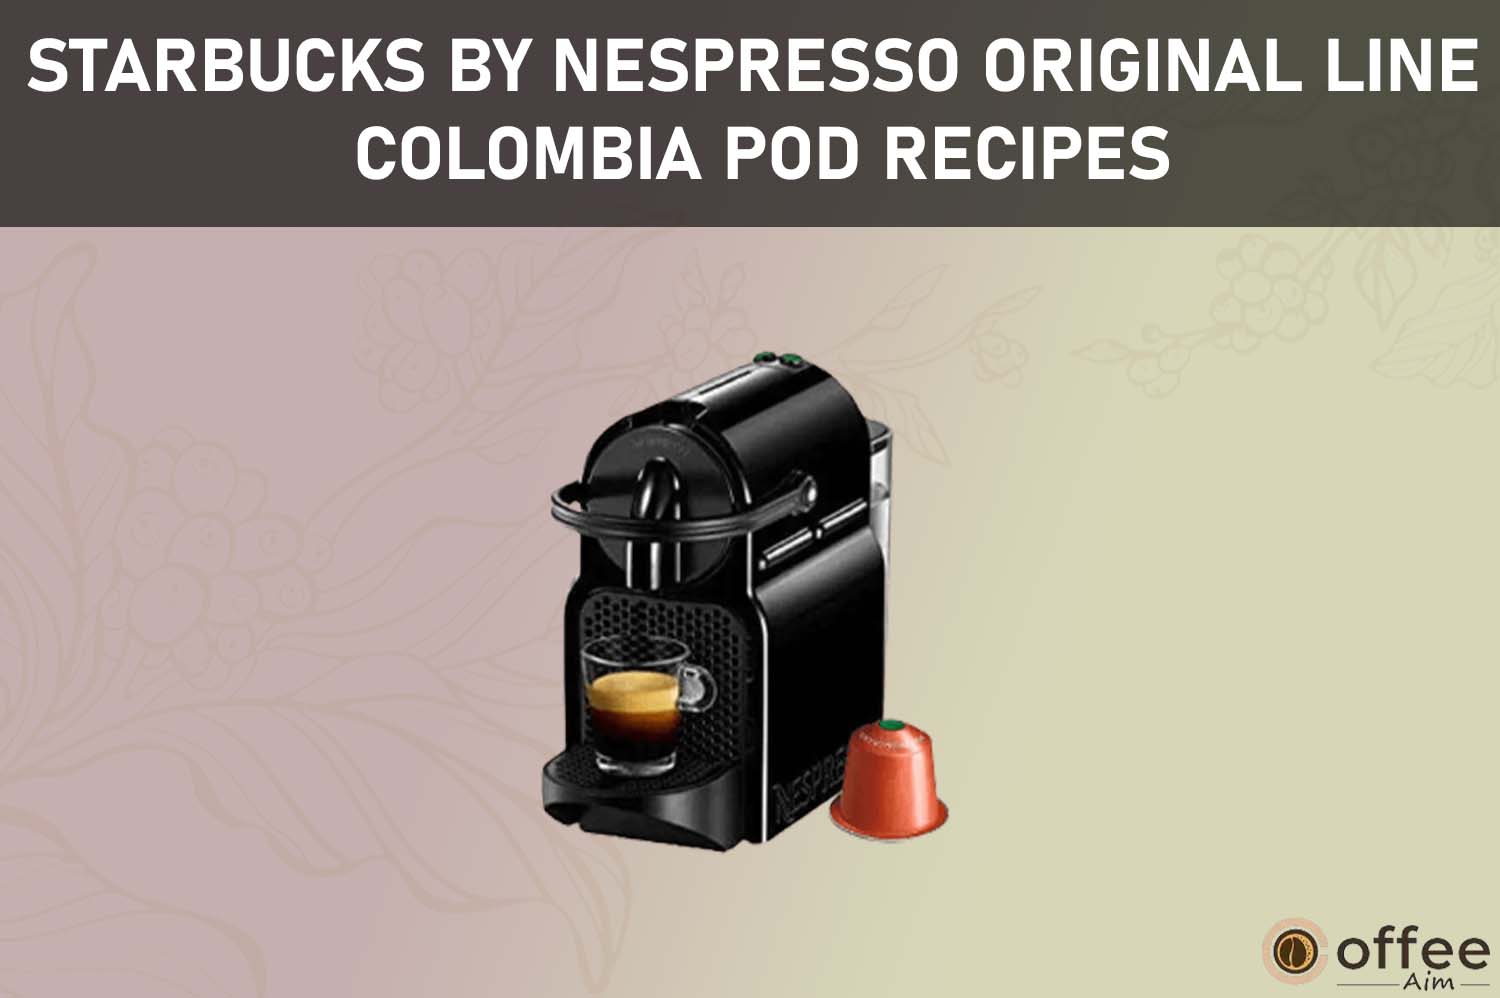 Featured image for the artilce "Starbucks by Nespresso Original Line Colombia Pod Recipes"